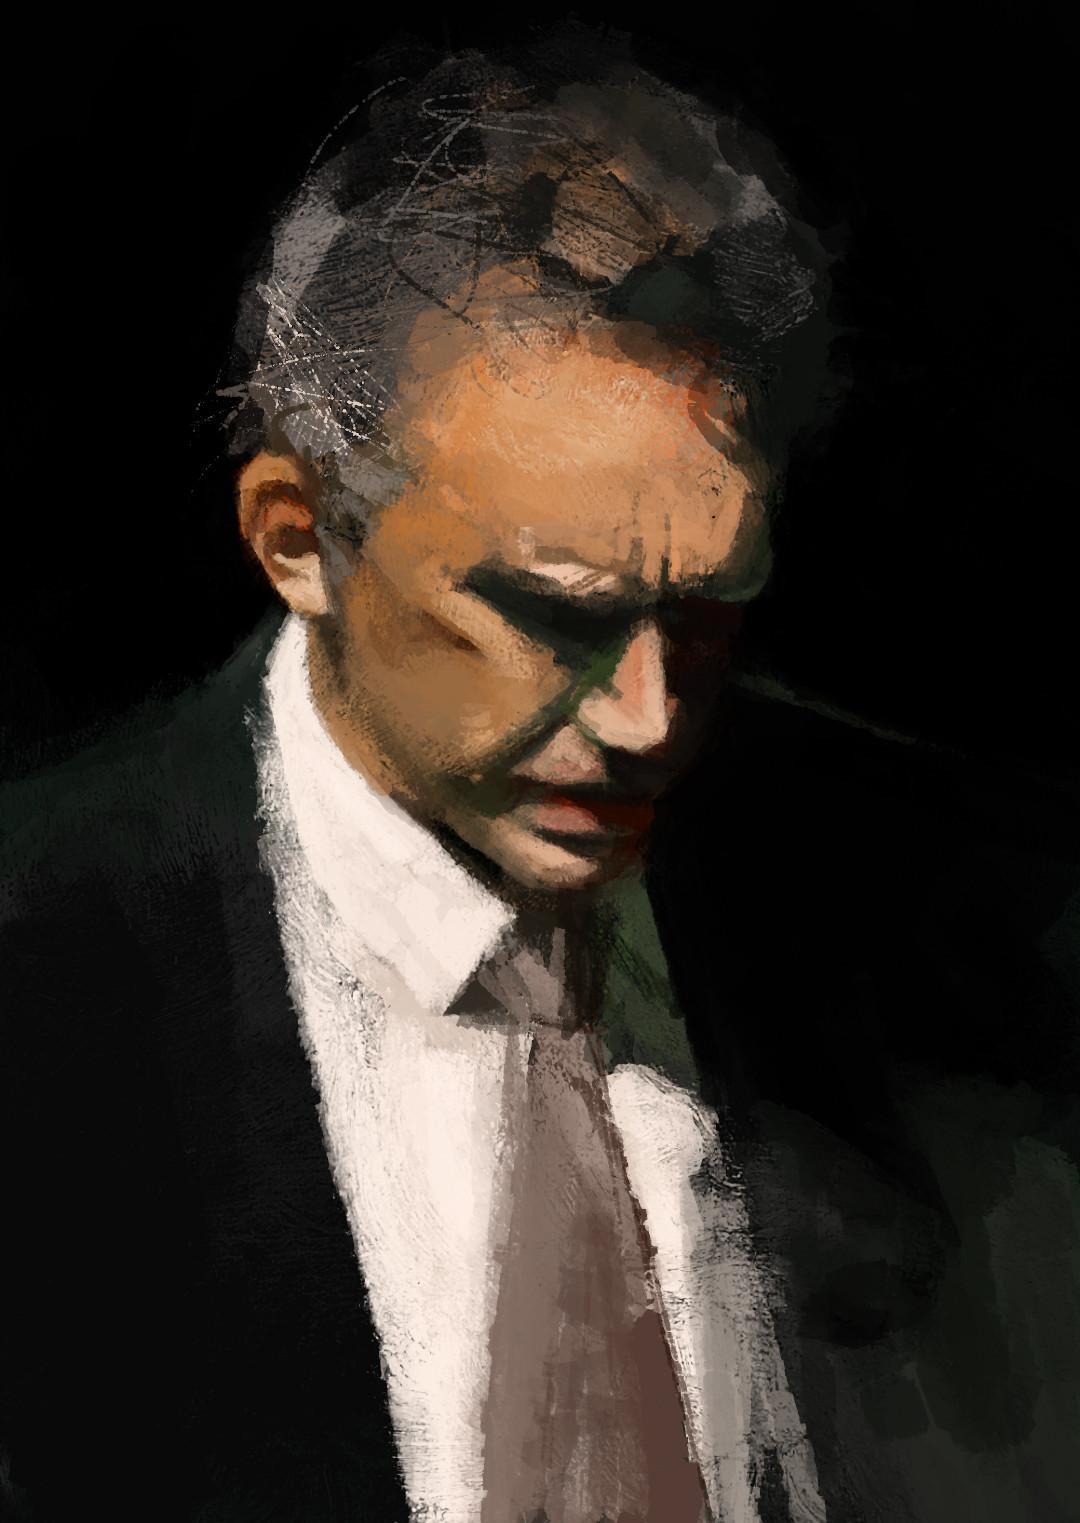 JBP artwork I use as a phone wallpaper. Thought you guys might